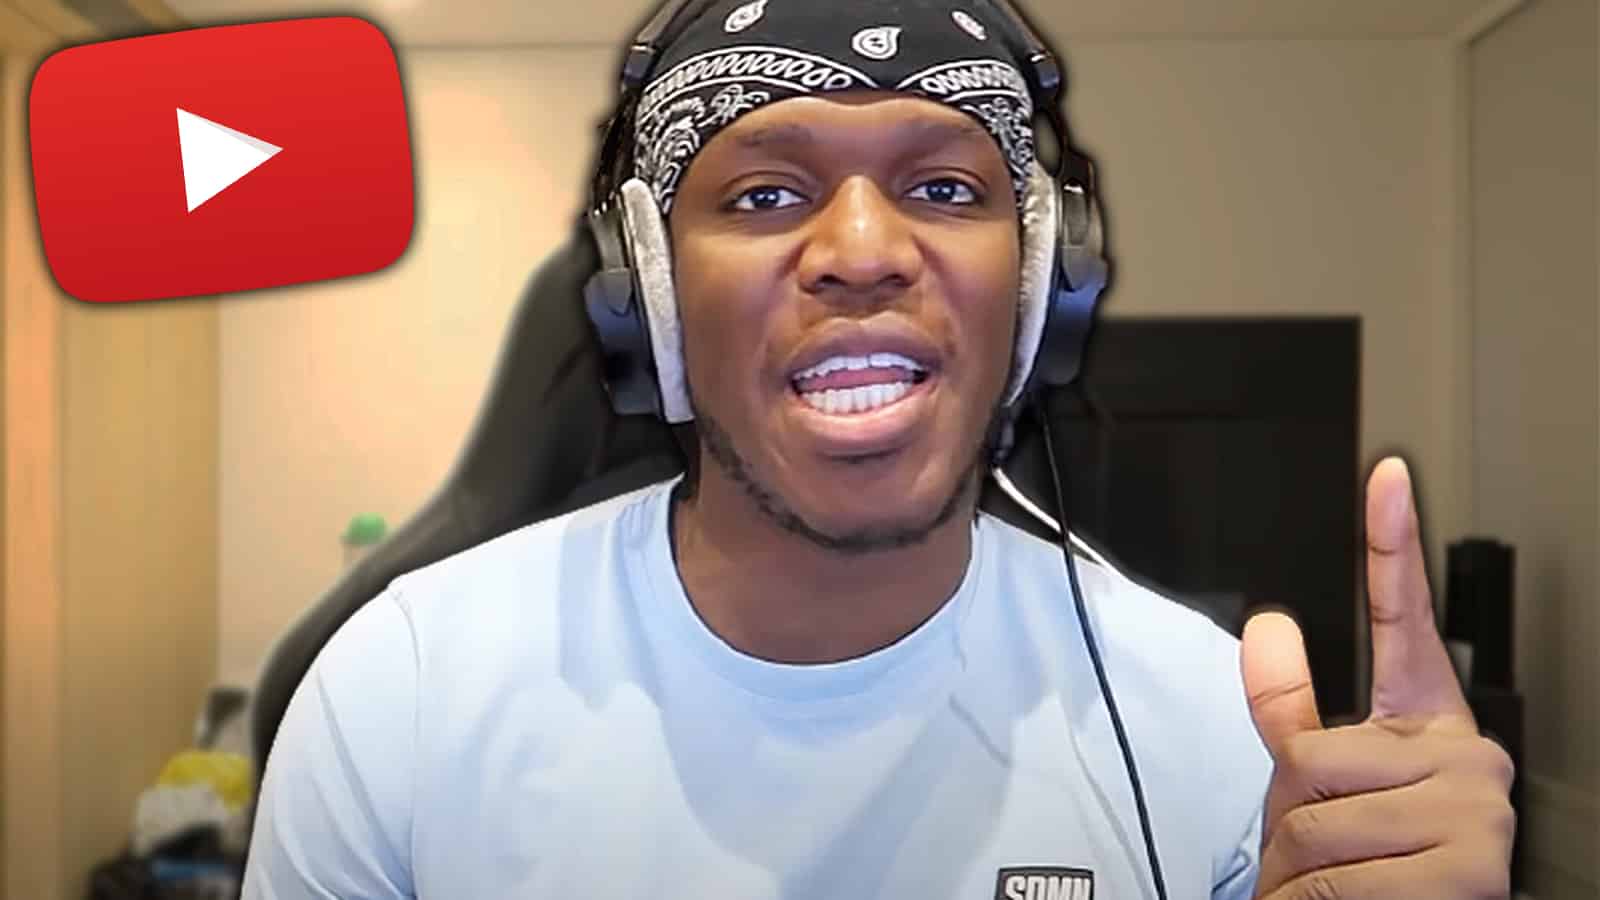 KSI hits out at youtube over strike